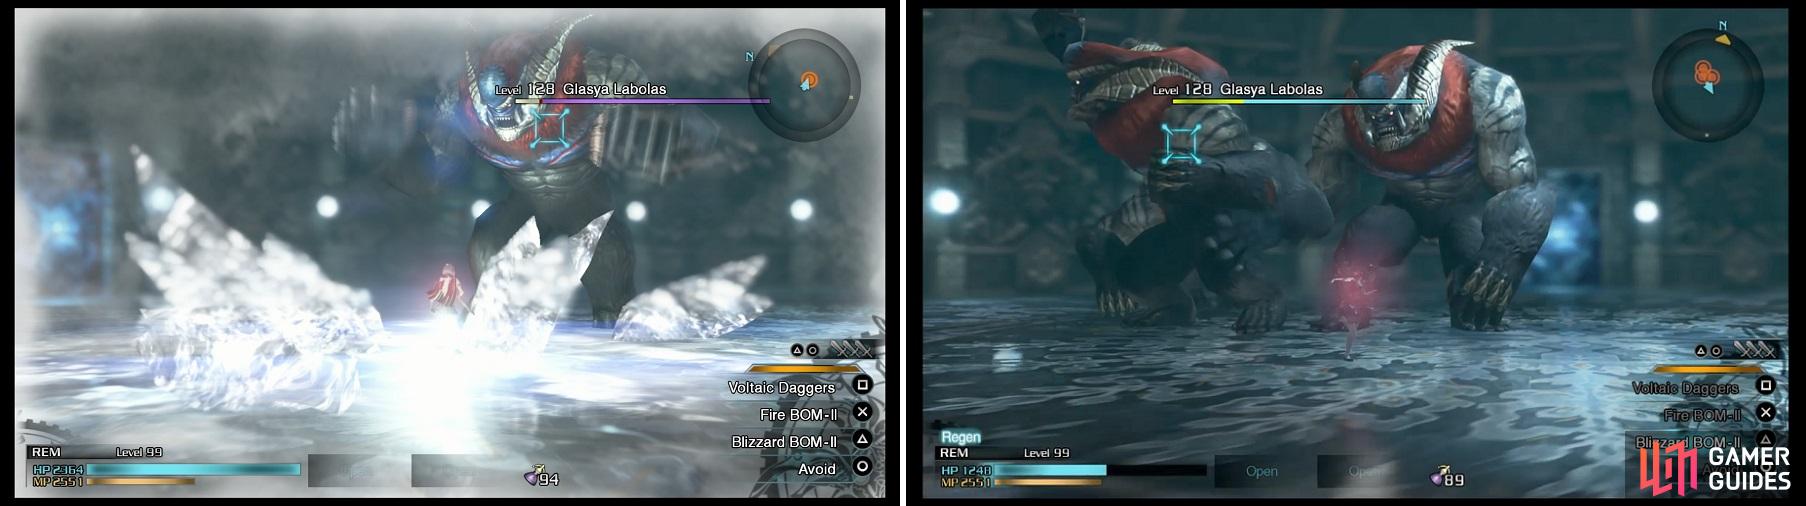 Despite their brethren, the Glasya are weak to ice (left). Things get a little hectic when you’re fighting three at once (right).